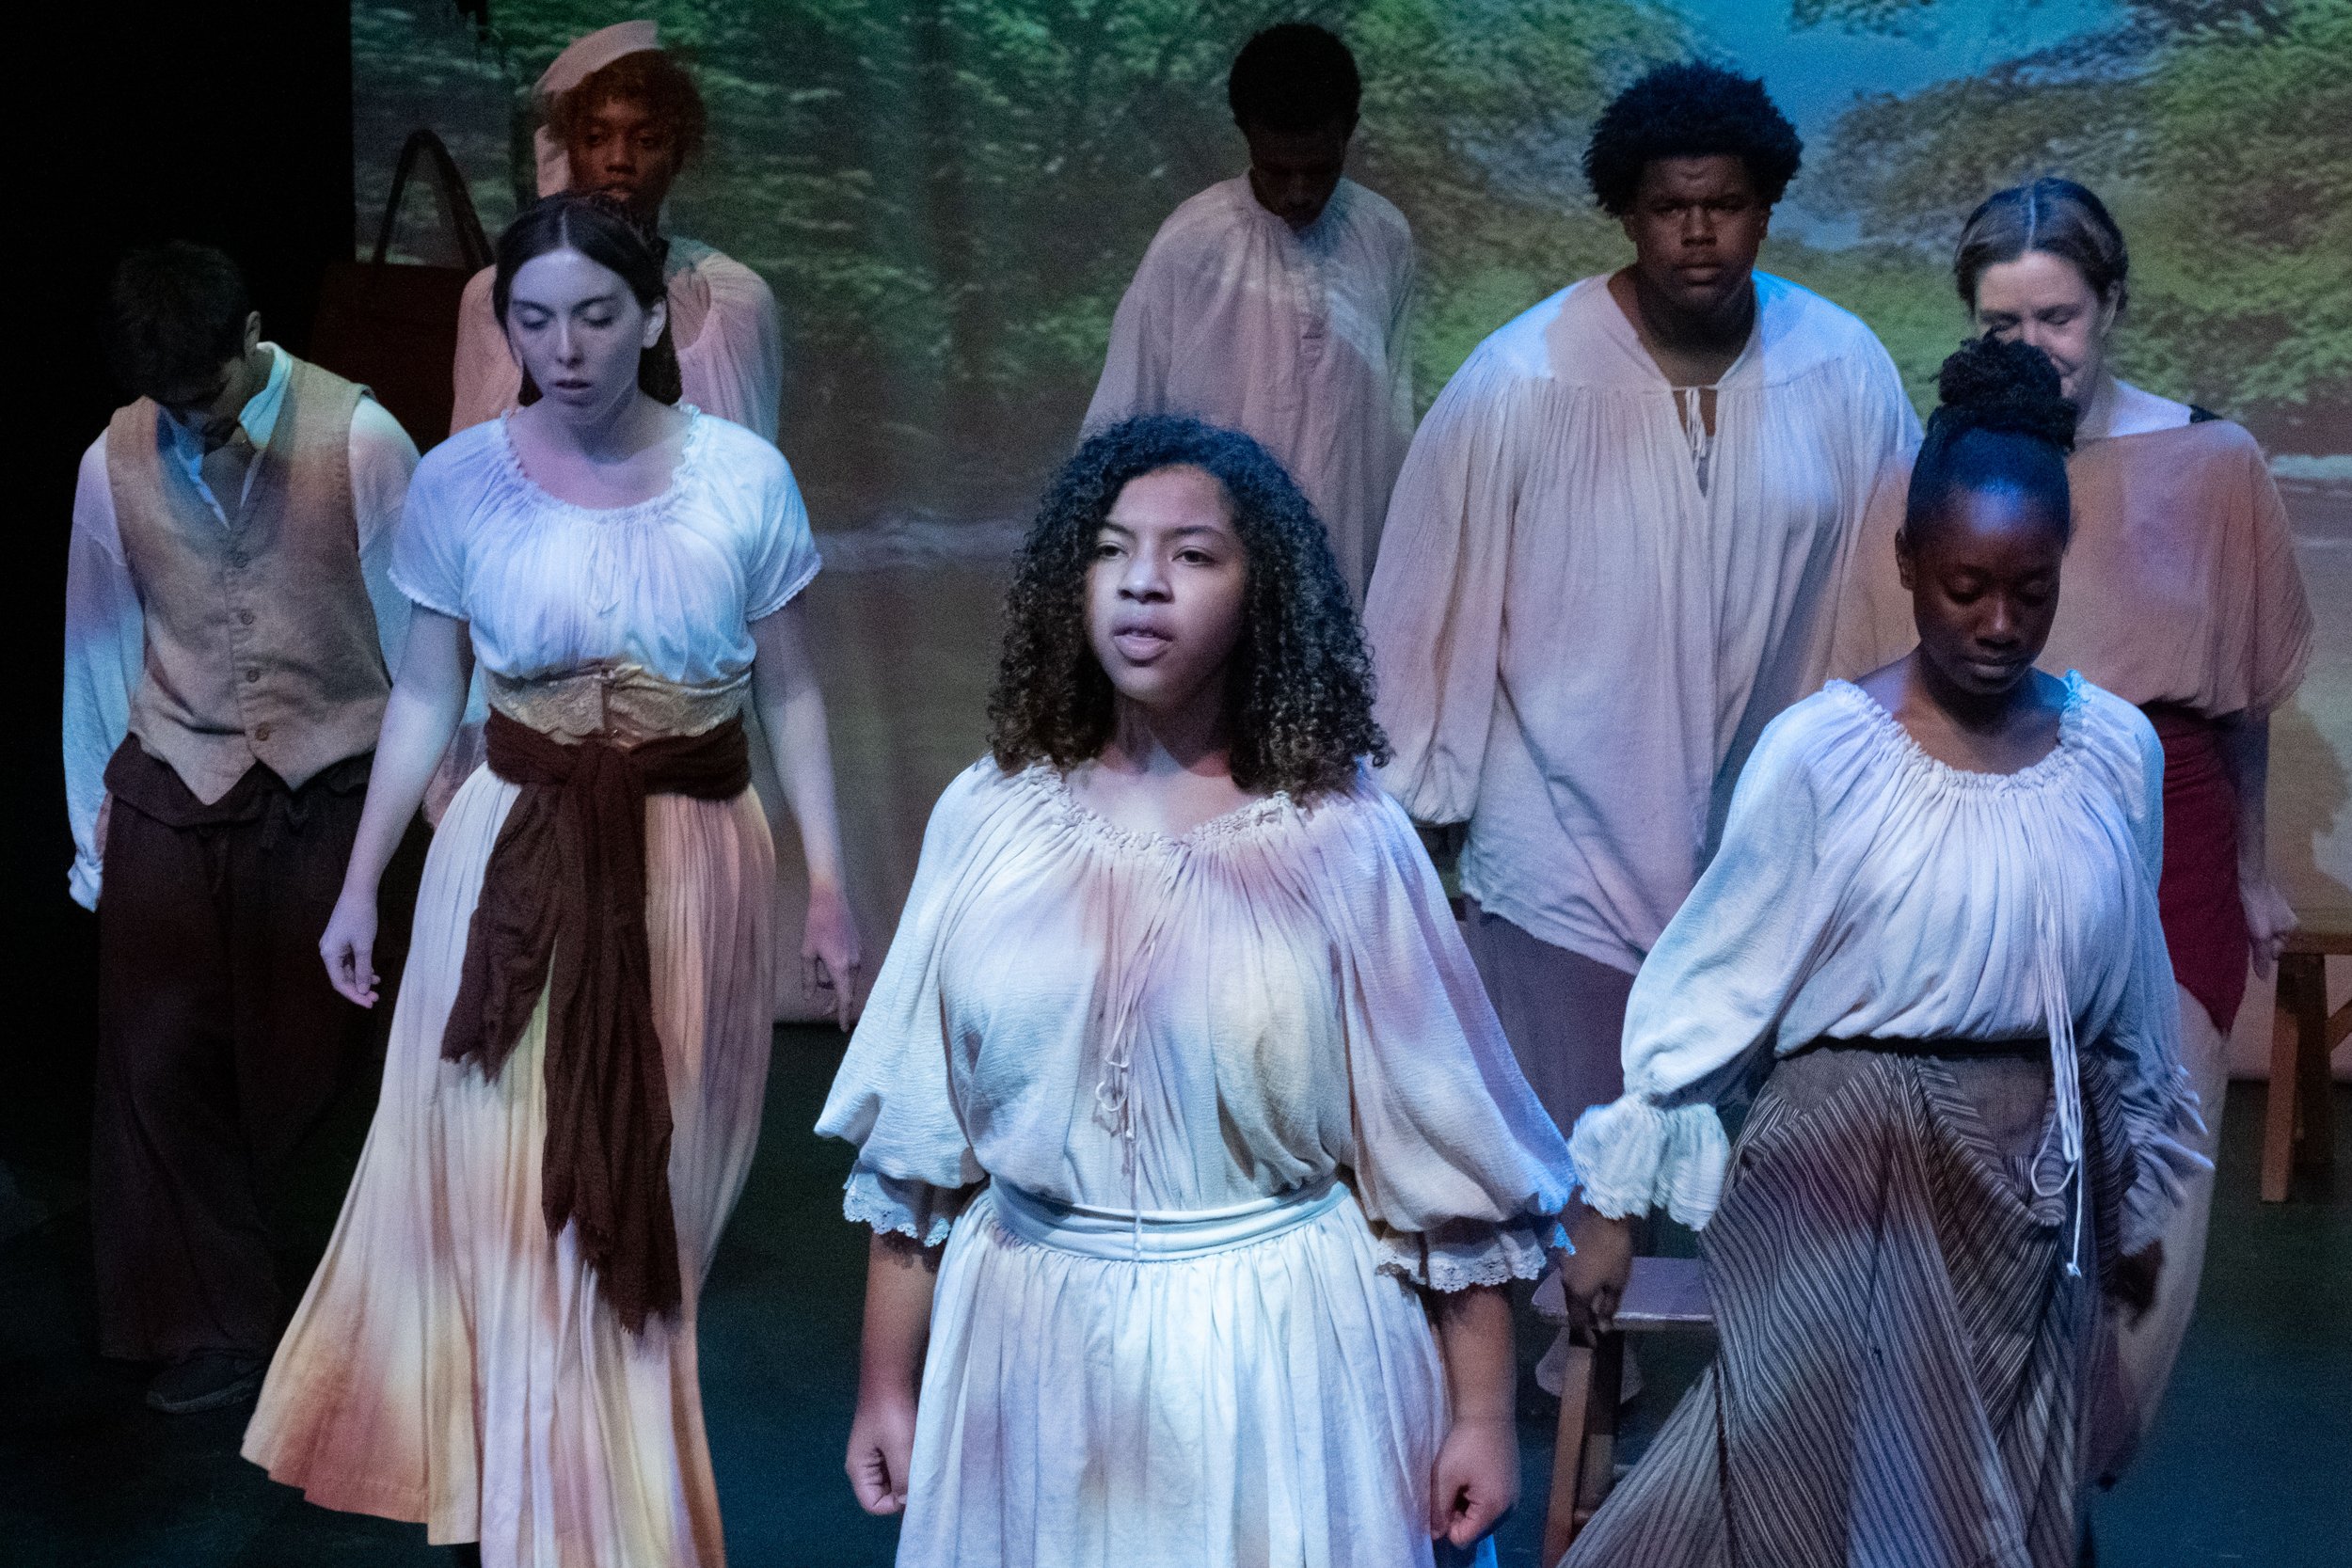  The cast of "By The River Rivanna," surround Cosette Okker (center) during the play performed on Tuesday Oct. 17th, 2023 in Santa Monica, Calif. at the Santa Monica Colllege Studio Stage. (Akemi Rico | The Corsair) 